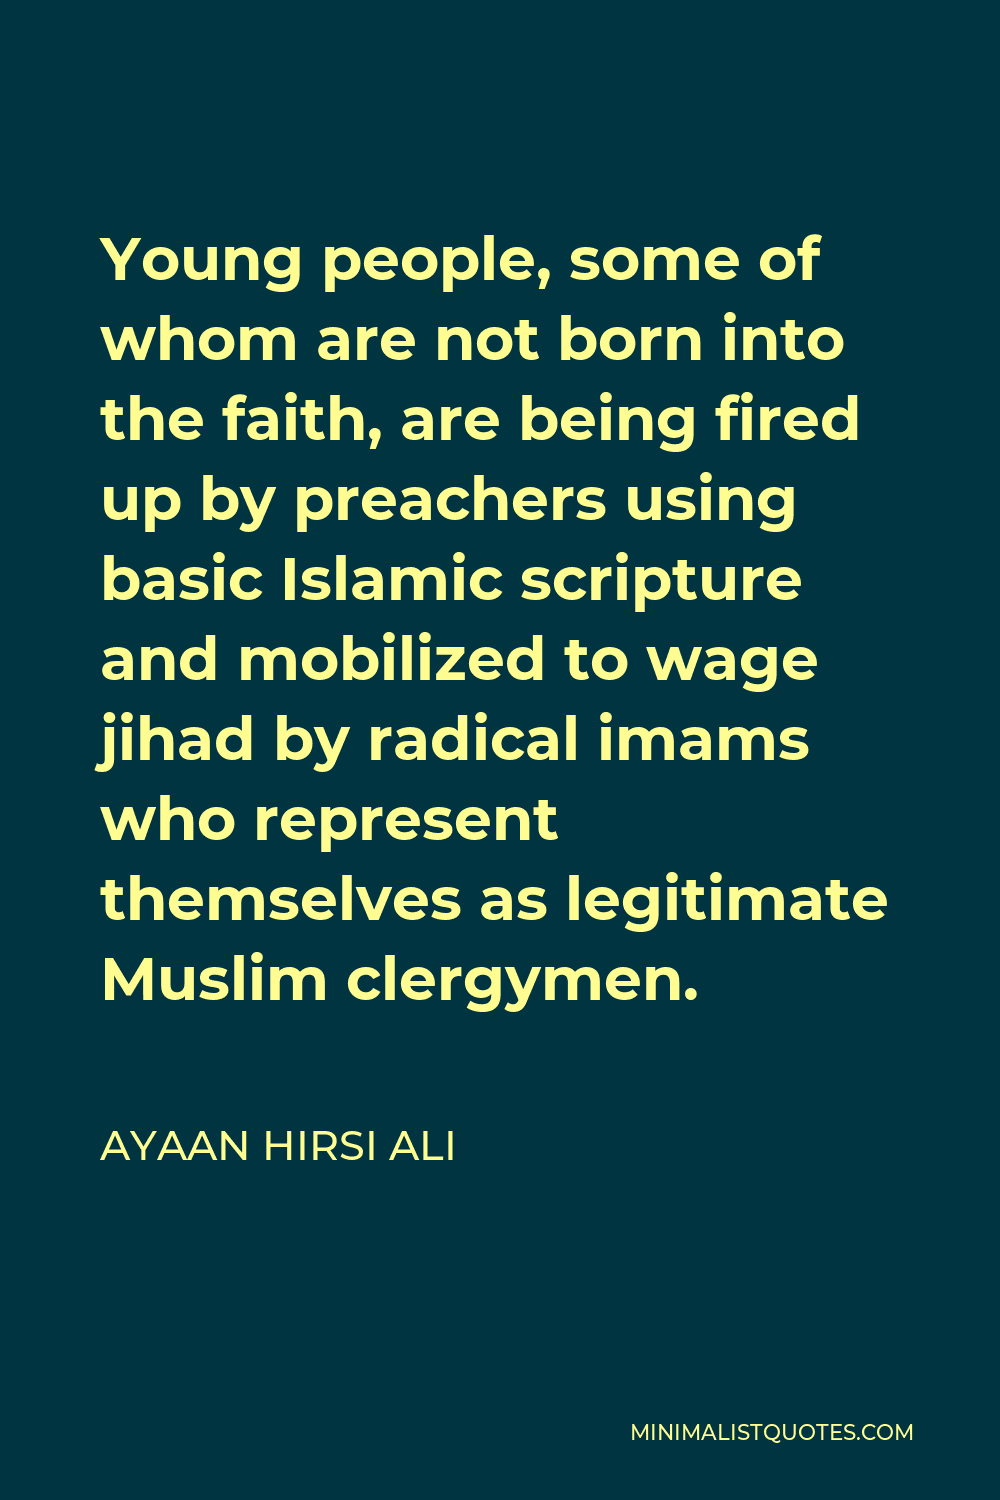 Ayaan Hirsi Ali Quote - Young people, some of whom are not born into the faith, are being fired up by preachers using basic Islamic scripture and mobilized to wage jihad by radical imams who represent themselves as legitimate Muslim clergymen.